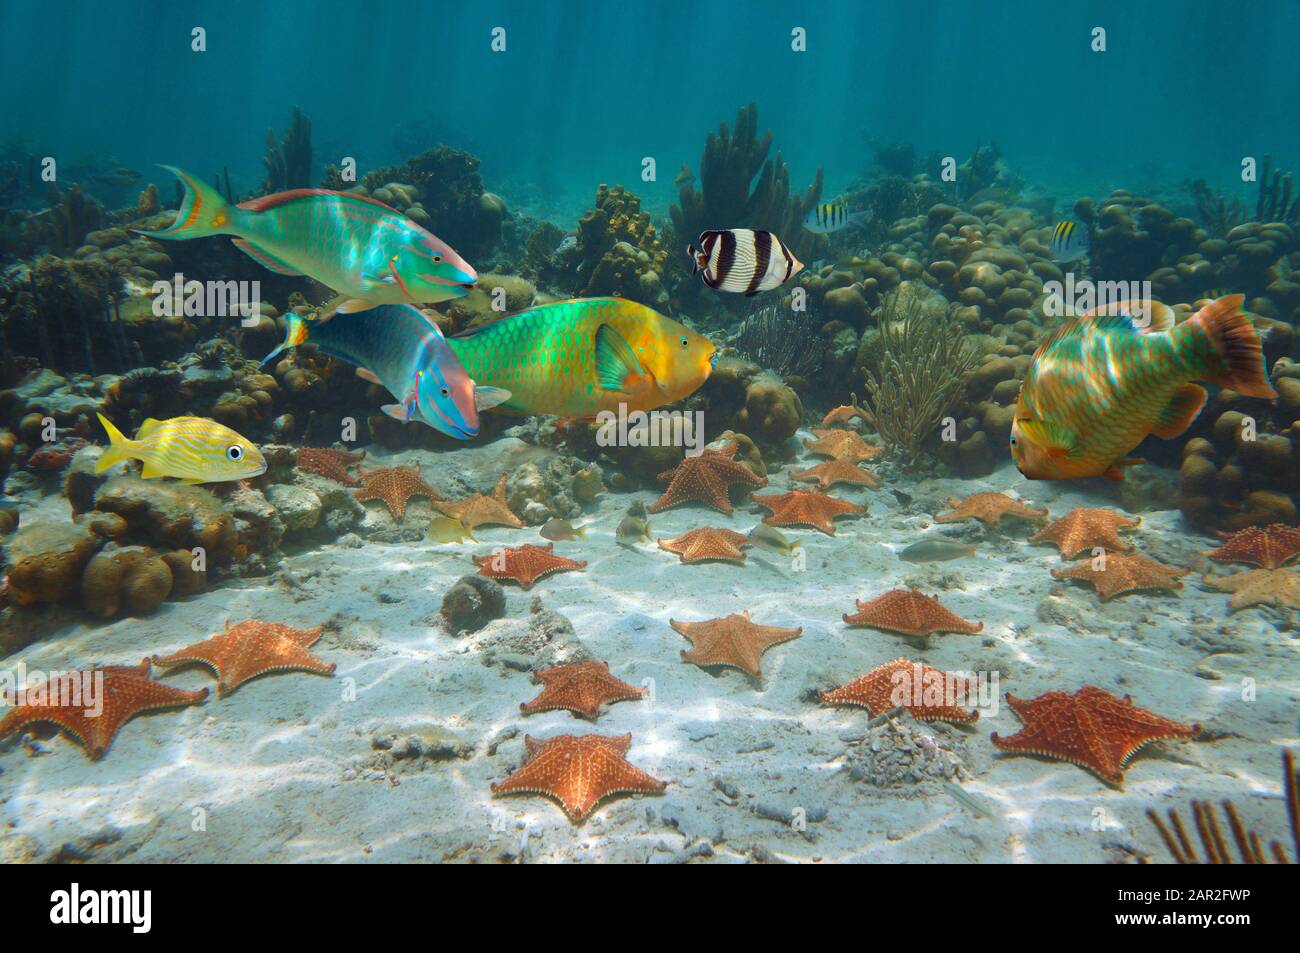 Sea stars with colorful tropical fish underwater in a coral reef Caribbean sea Stock Photo